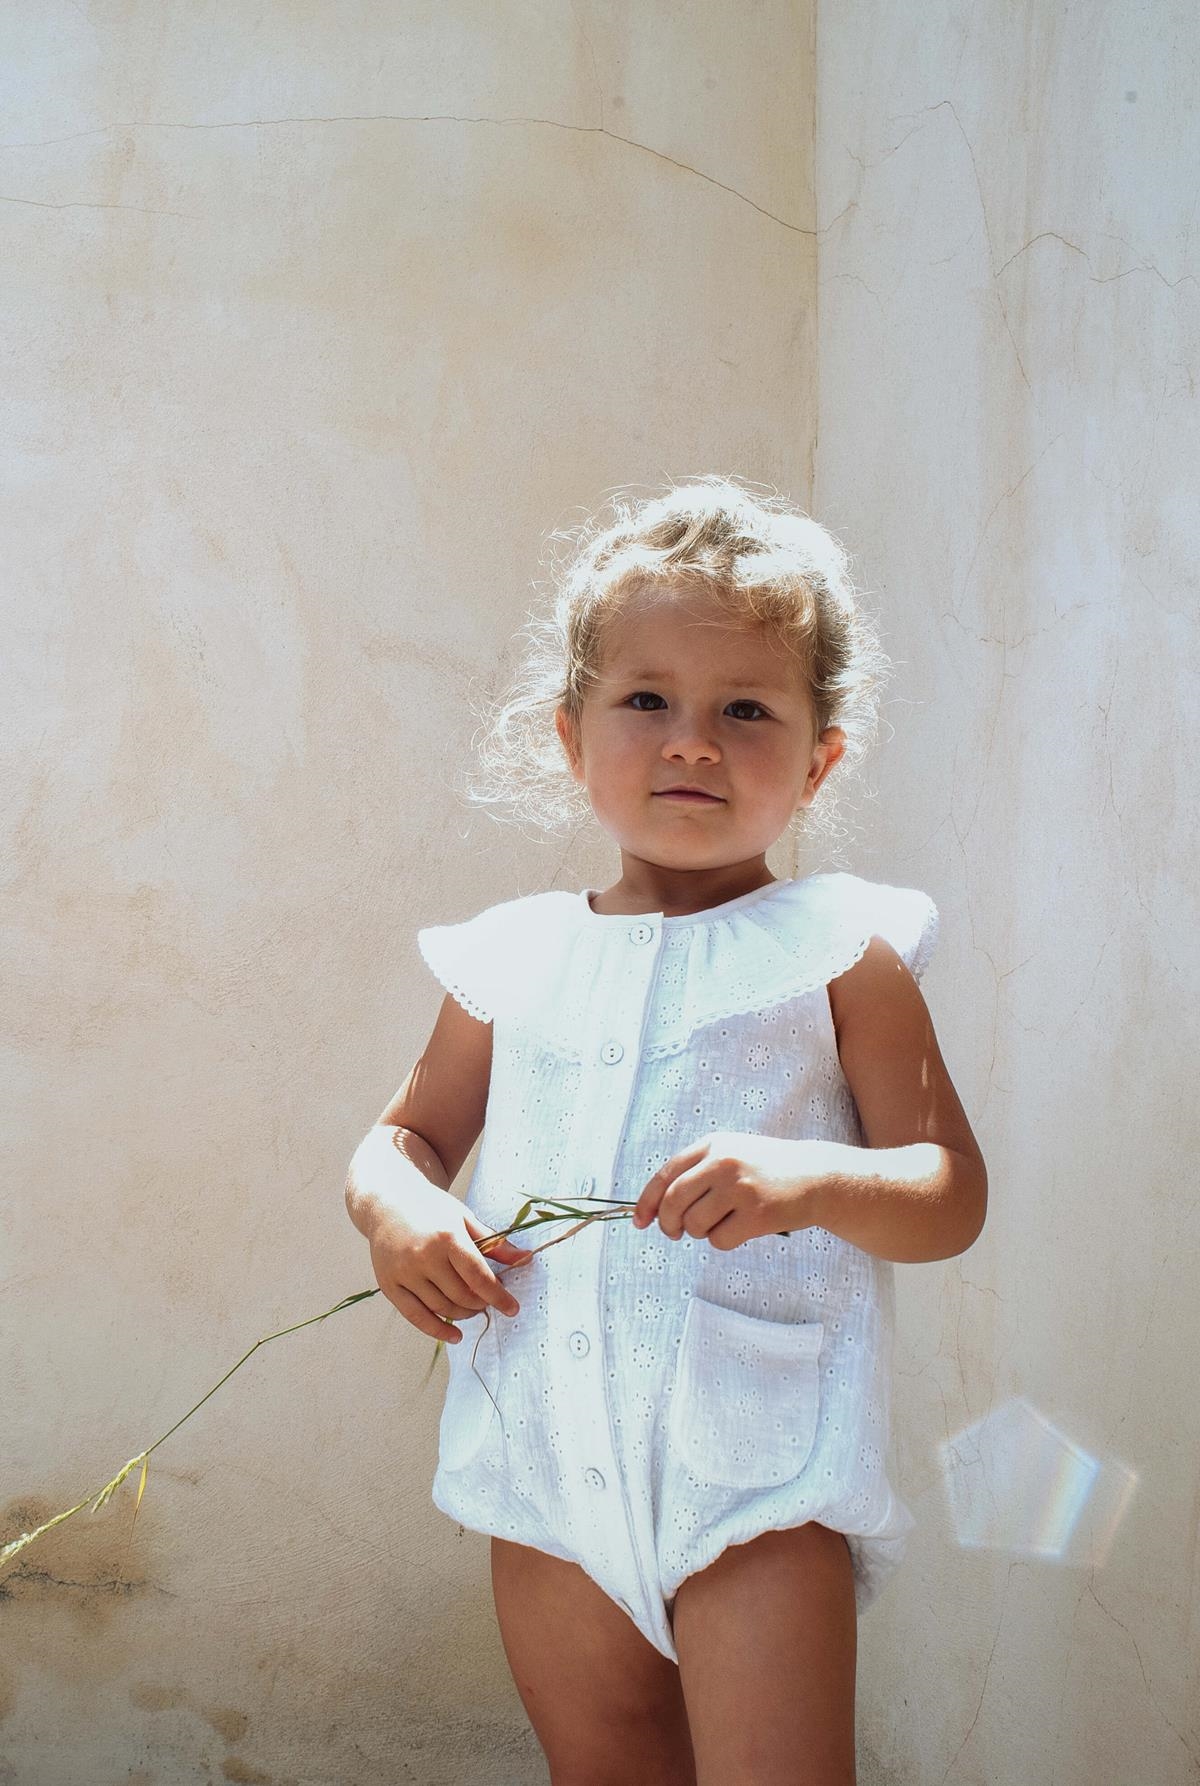 Mod.8.2 Organic romper suit with frilled collar with Swiss embroidery | SS22 Mod.8.2 Organic romper suit with frilled collar with Swiss embroidery | 1